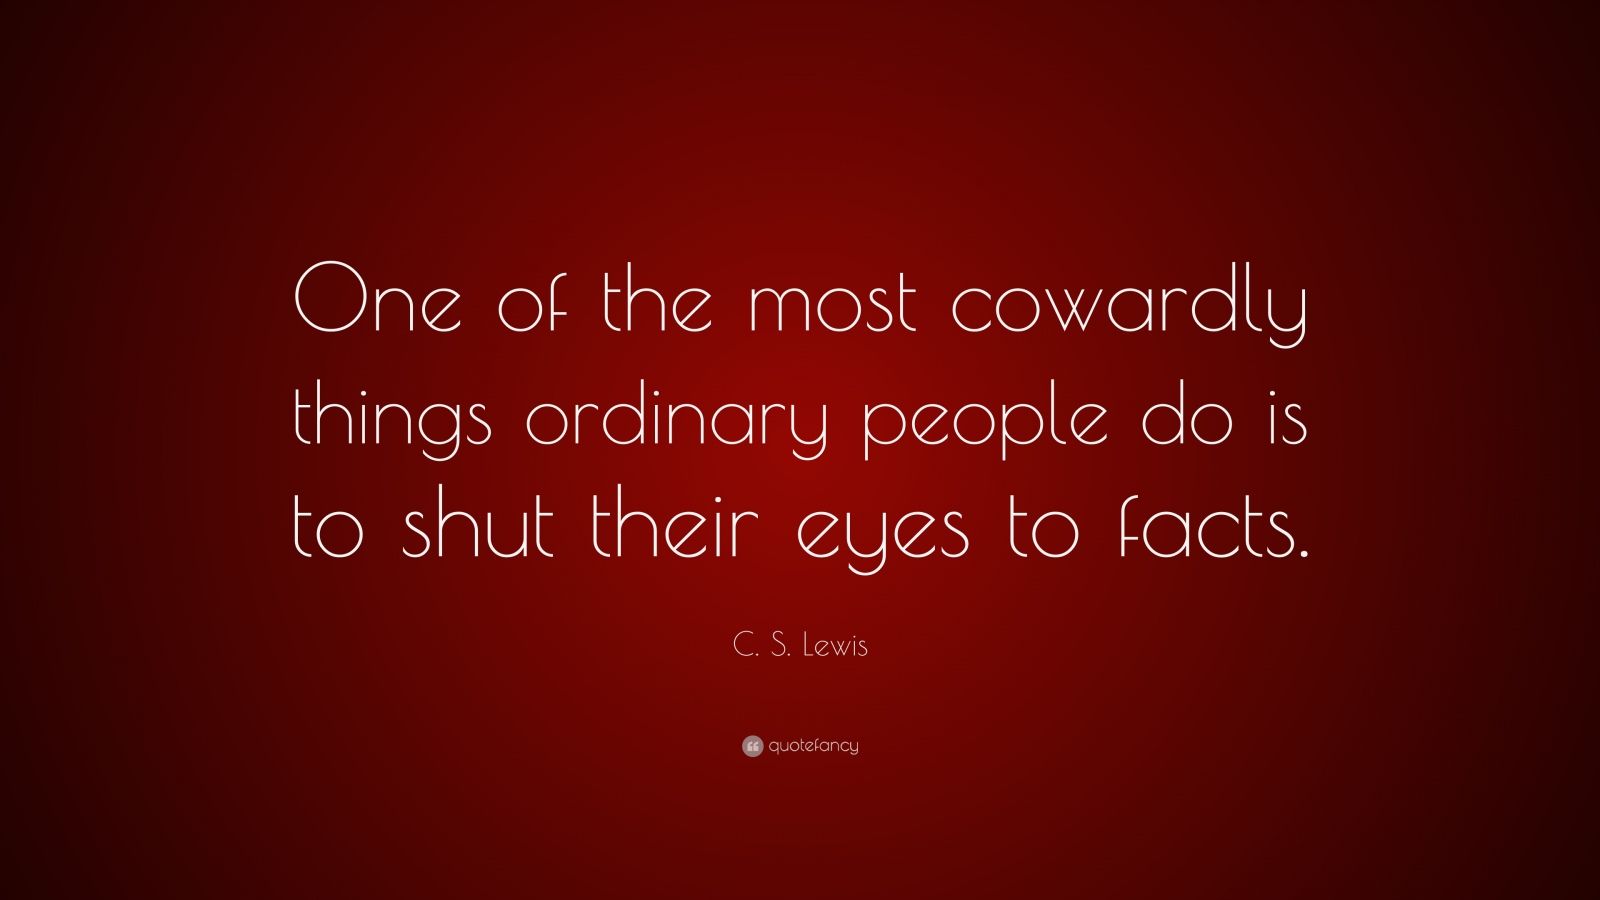 C. S. Lewis Quote: “One of the most cowardly things ordinary people do ...